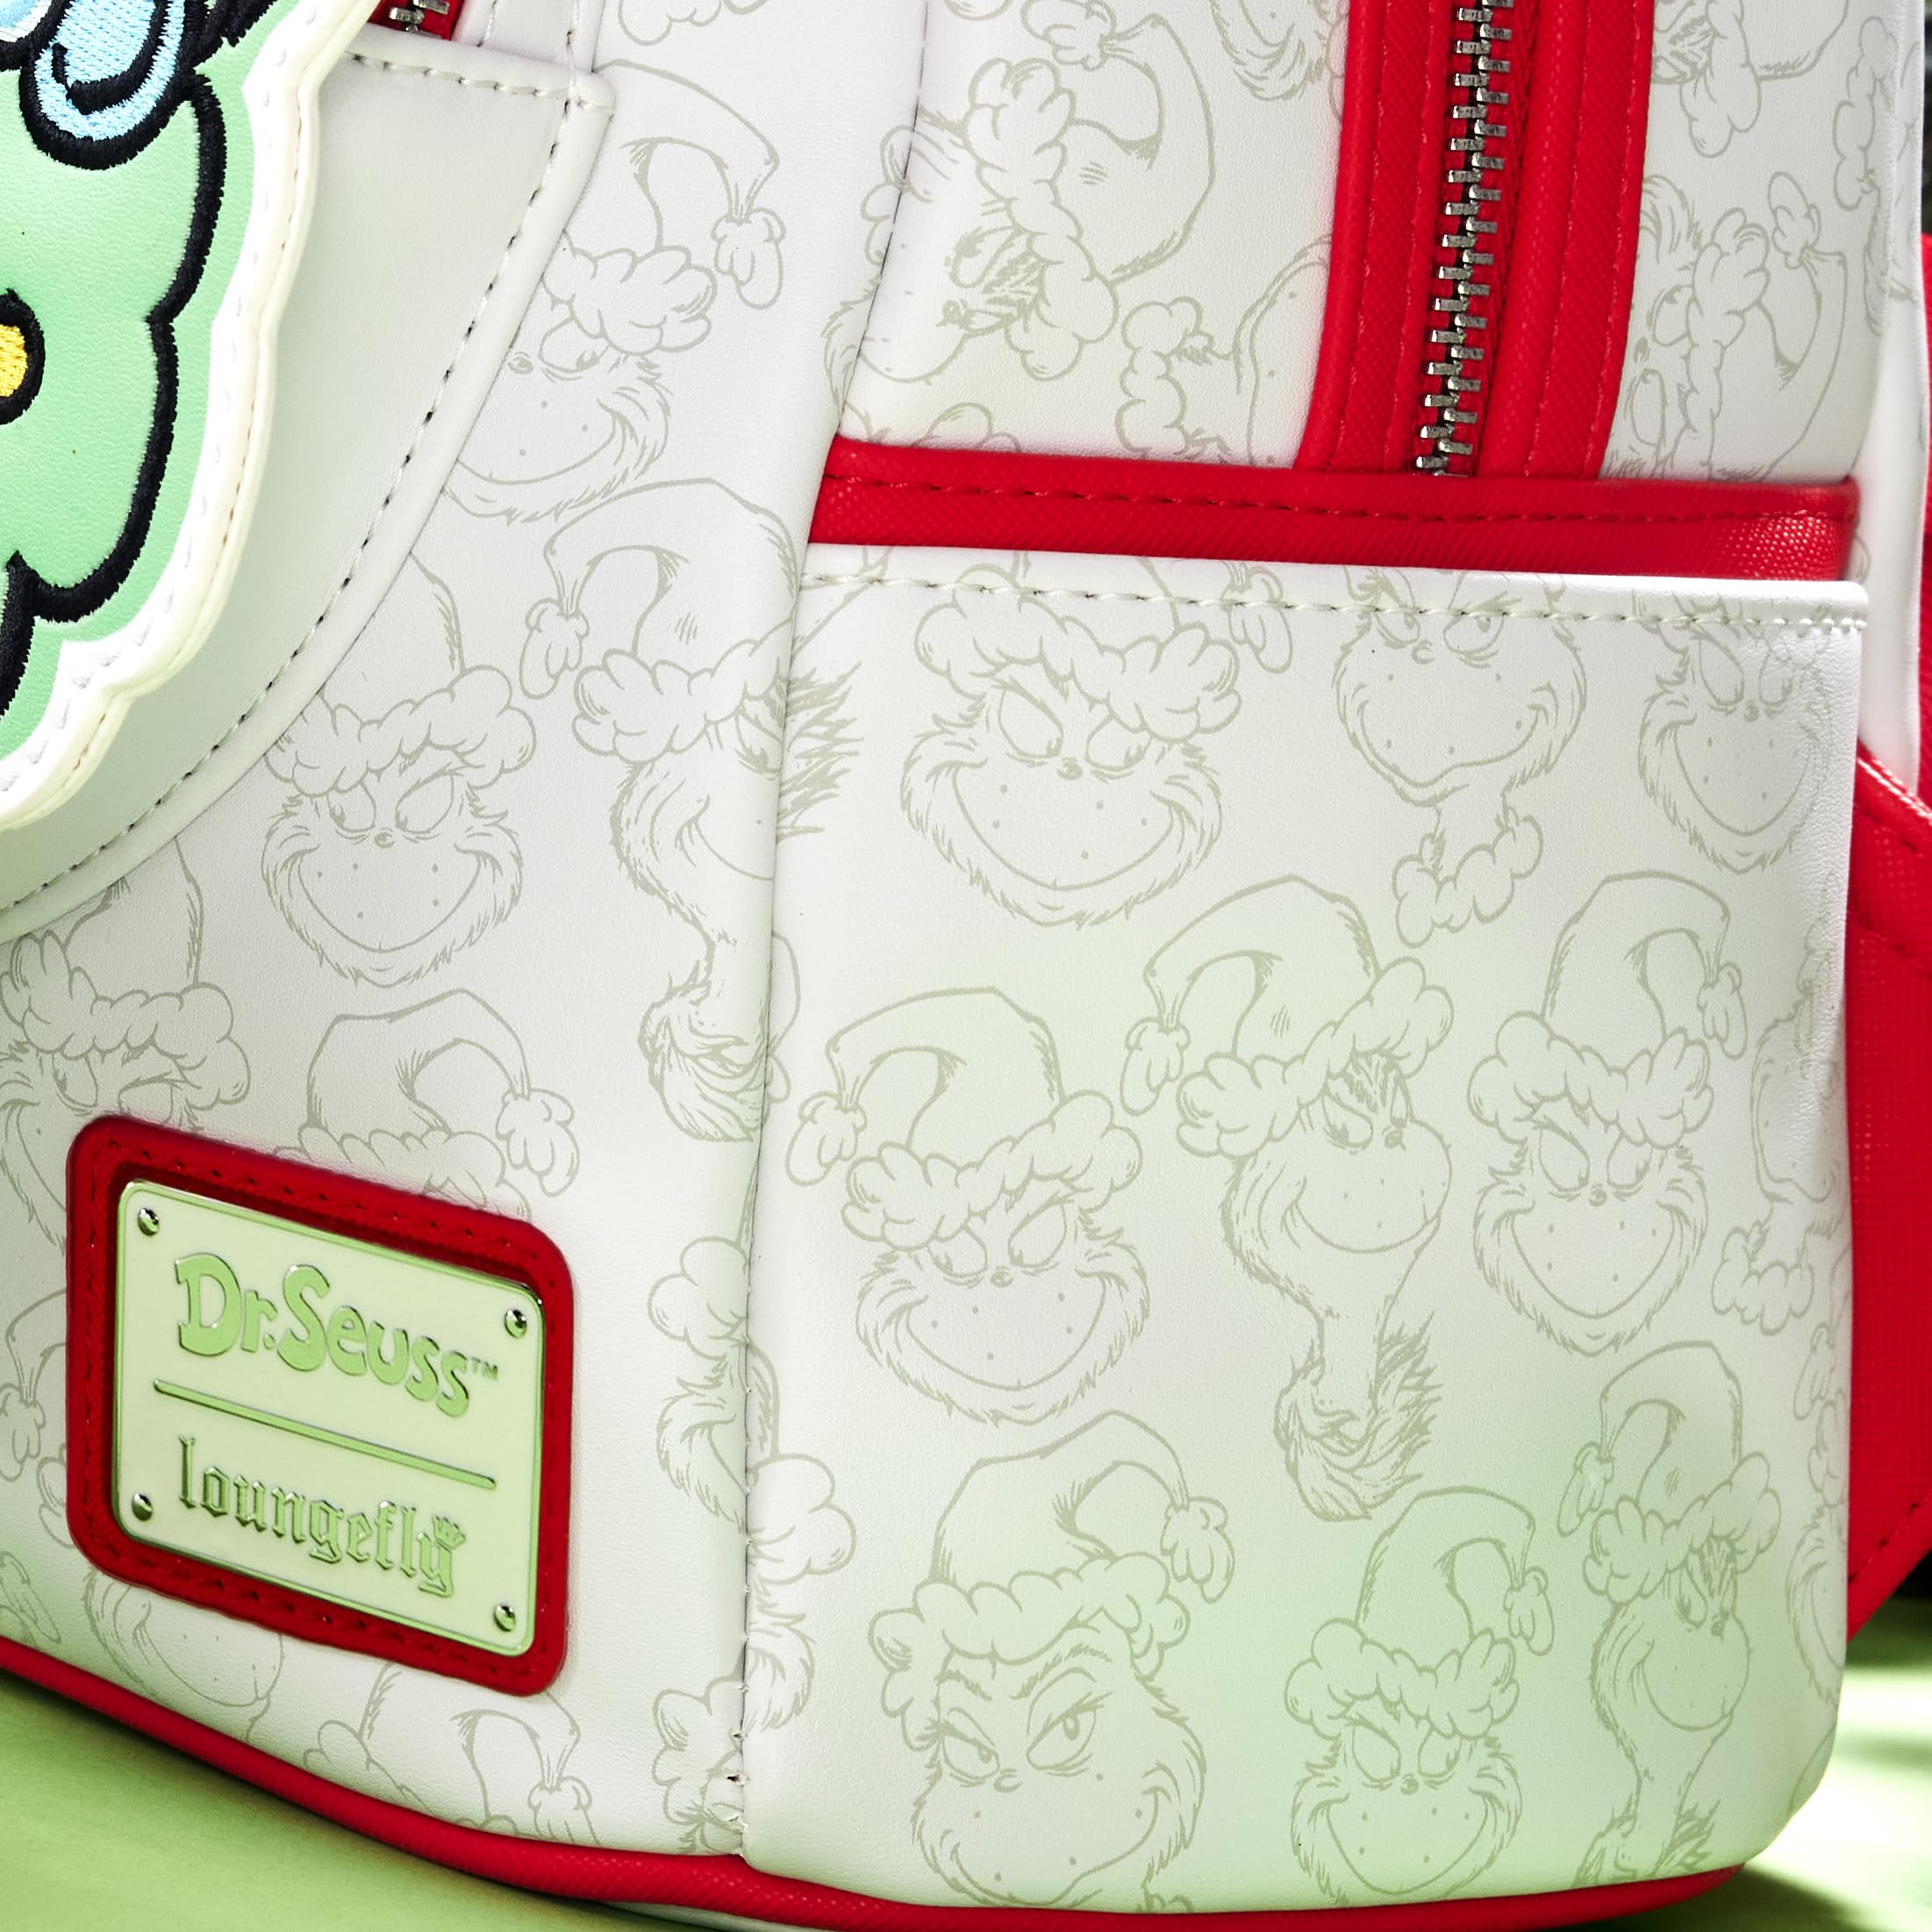 Loungefly Dr. Seuss: Grinch Mini-Backpack, Amazon Exclusive